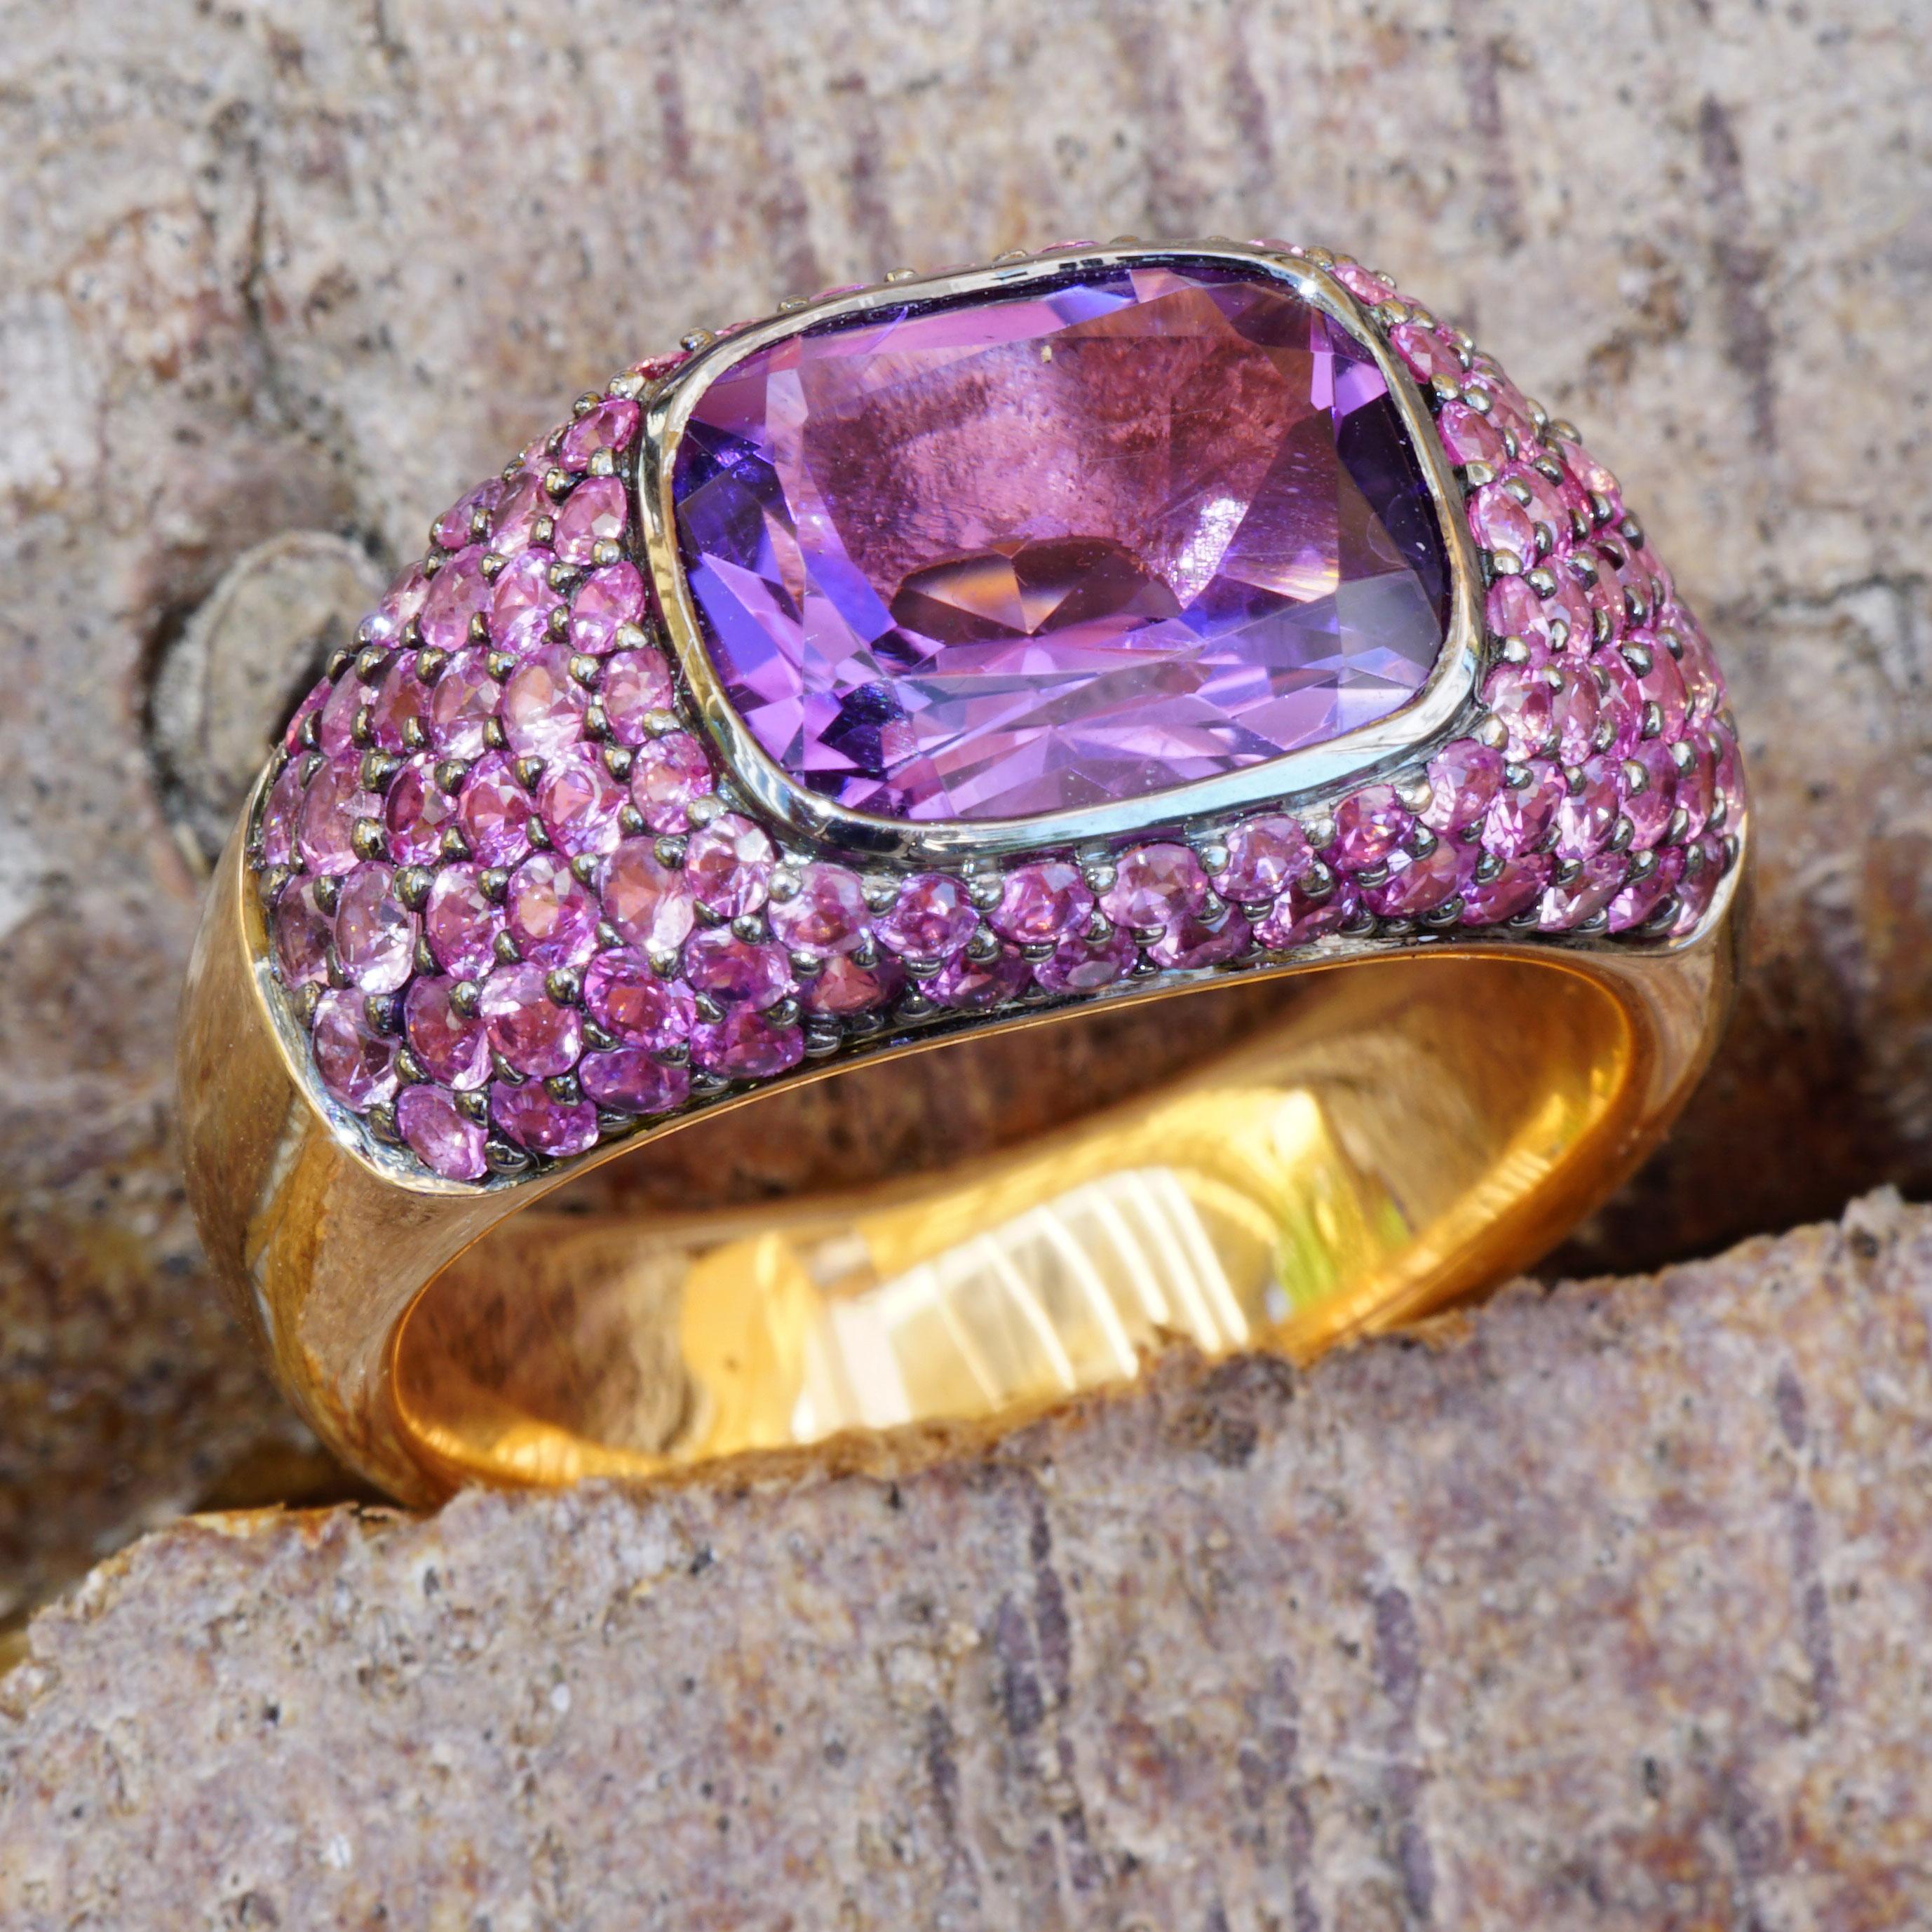 Amethyst-Saphir-Ring 18 Kt Roségold AAA+ Perfect Jewelers Art Made in Valenza im Angebot 3